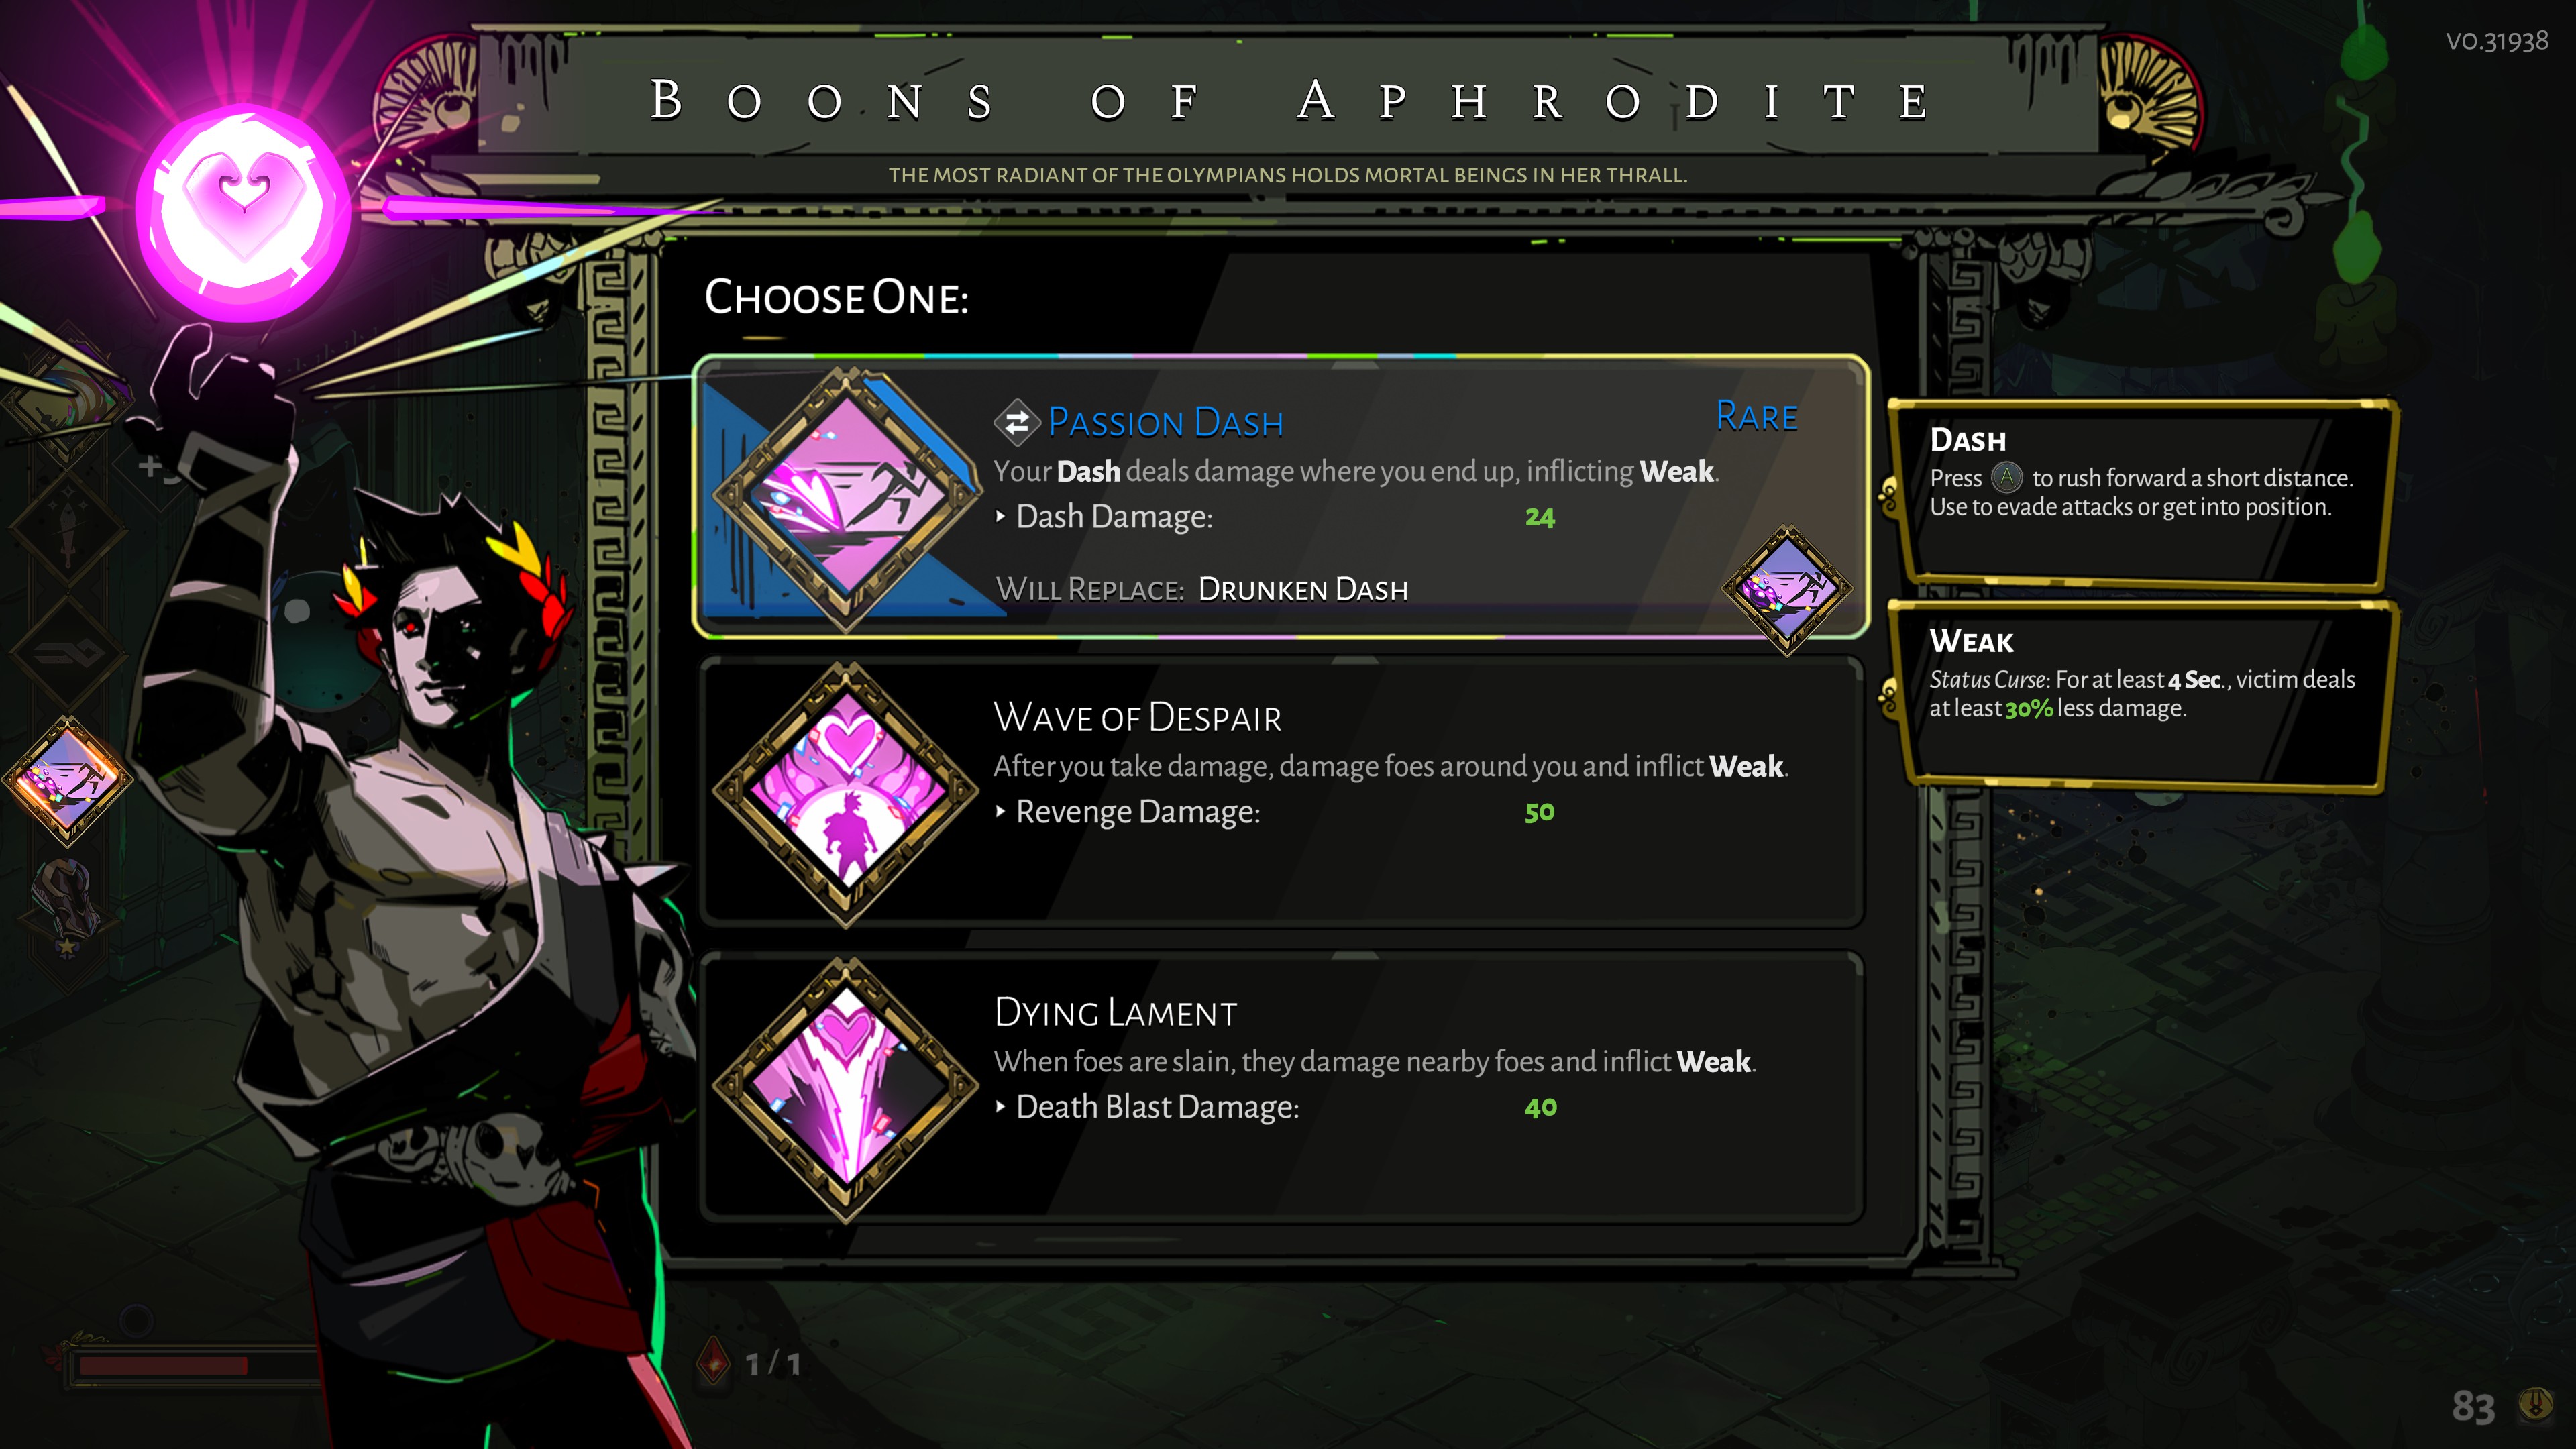 Aphrodite offers upgrades that inflict Weak.